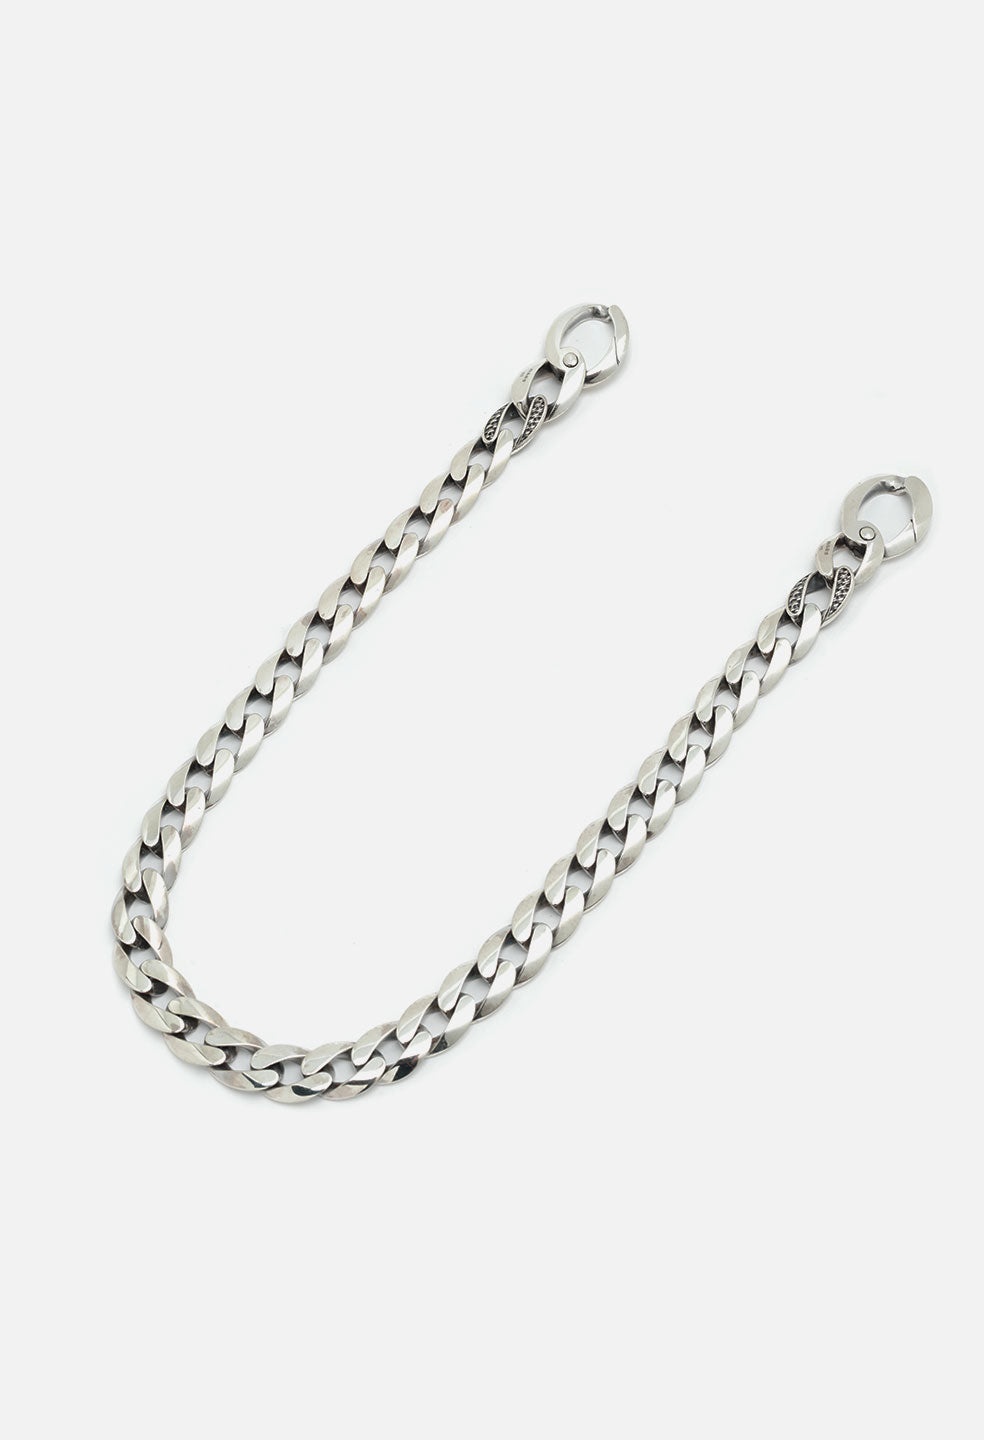 M.A.R.S WALLET CHAIN - 3